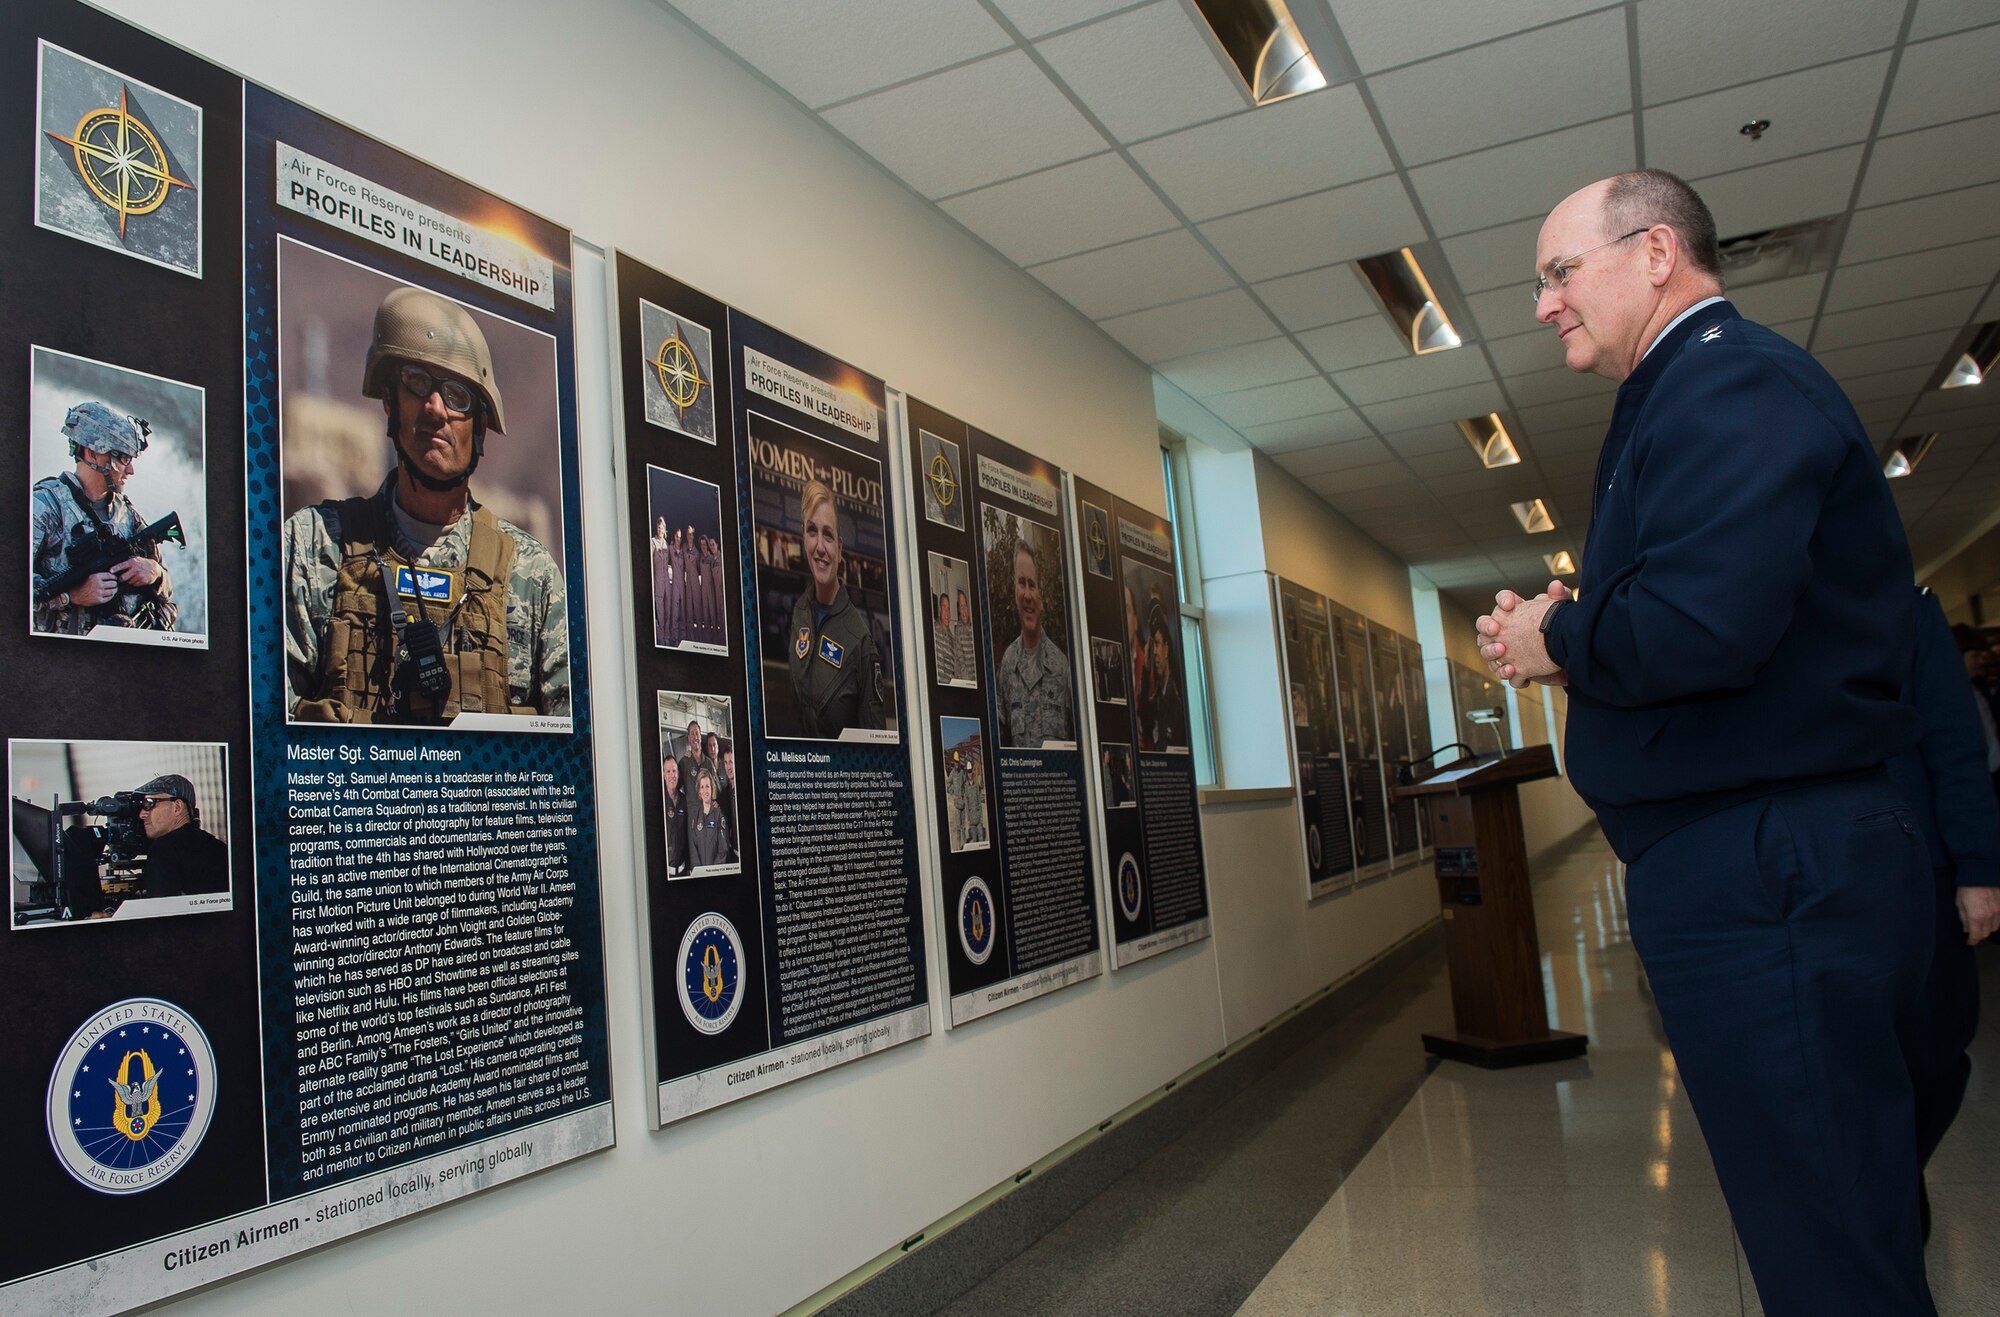 Chief of the Air Force Reserve Lt. Gen. James Jackson looks over the panels after unveiling the Profiles in Leadership display in the Pentagon, Washington D.C., Dec. 7, 2015. The display highlights outstanding examples of leadership in the Air Reserve forces, and celebrates and honors Citizen Airmen's contributions in serving the nation. (U.S. Air Force Photo/Jim Varhegyi)